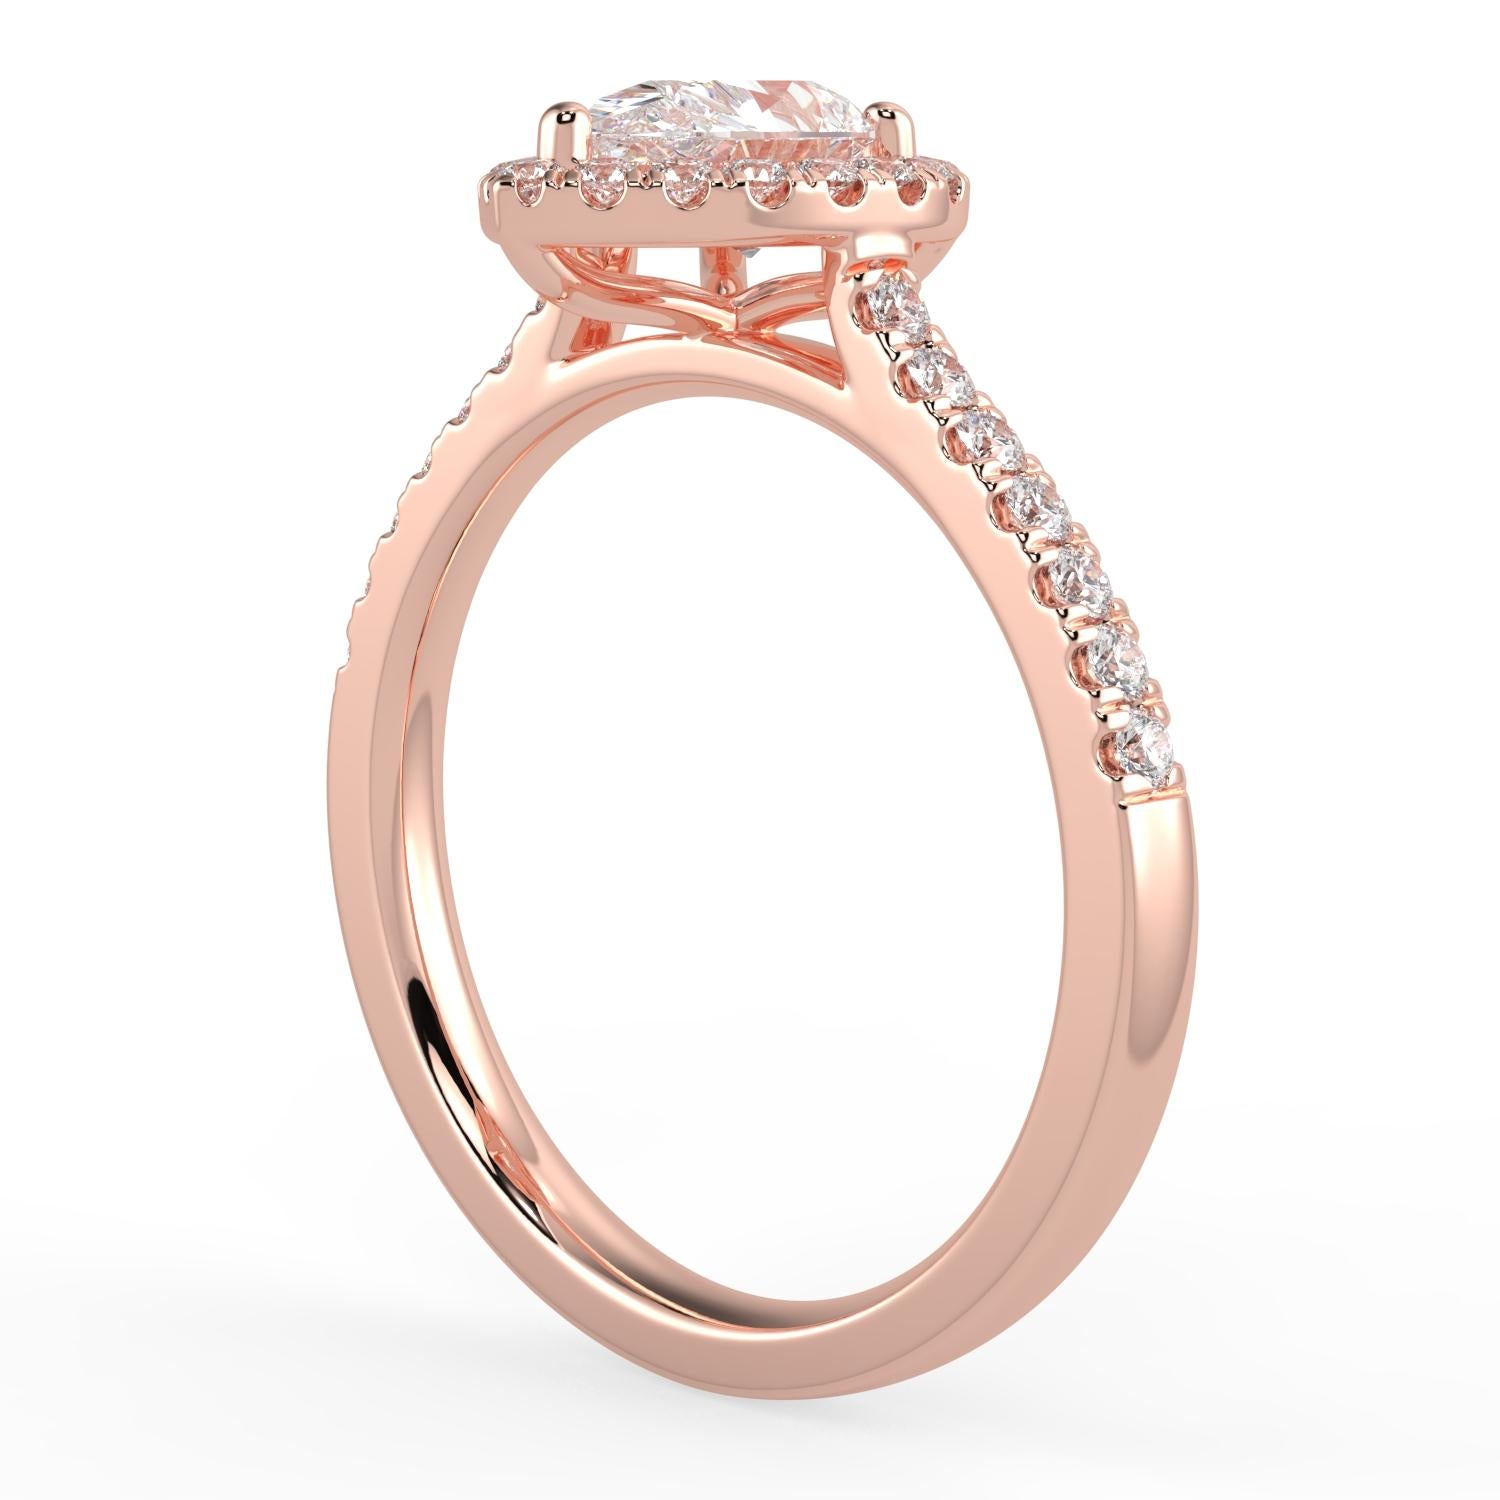 AAMIAA HEARTS DIAMOND RING
1ct Natural Diamond G-H Color SI Clarity Perfect Design Shape Halo Fashion Stunning Promise Ring 14K White Gold

Specification:
Brand: Aamiaa
Metal: Rose Gold
Metal Purity: 14k
Center Diamond Shape: Pear
Design: